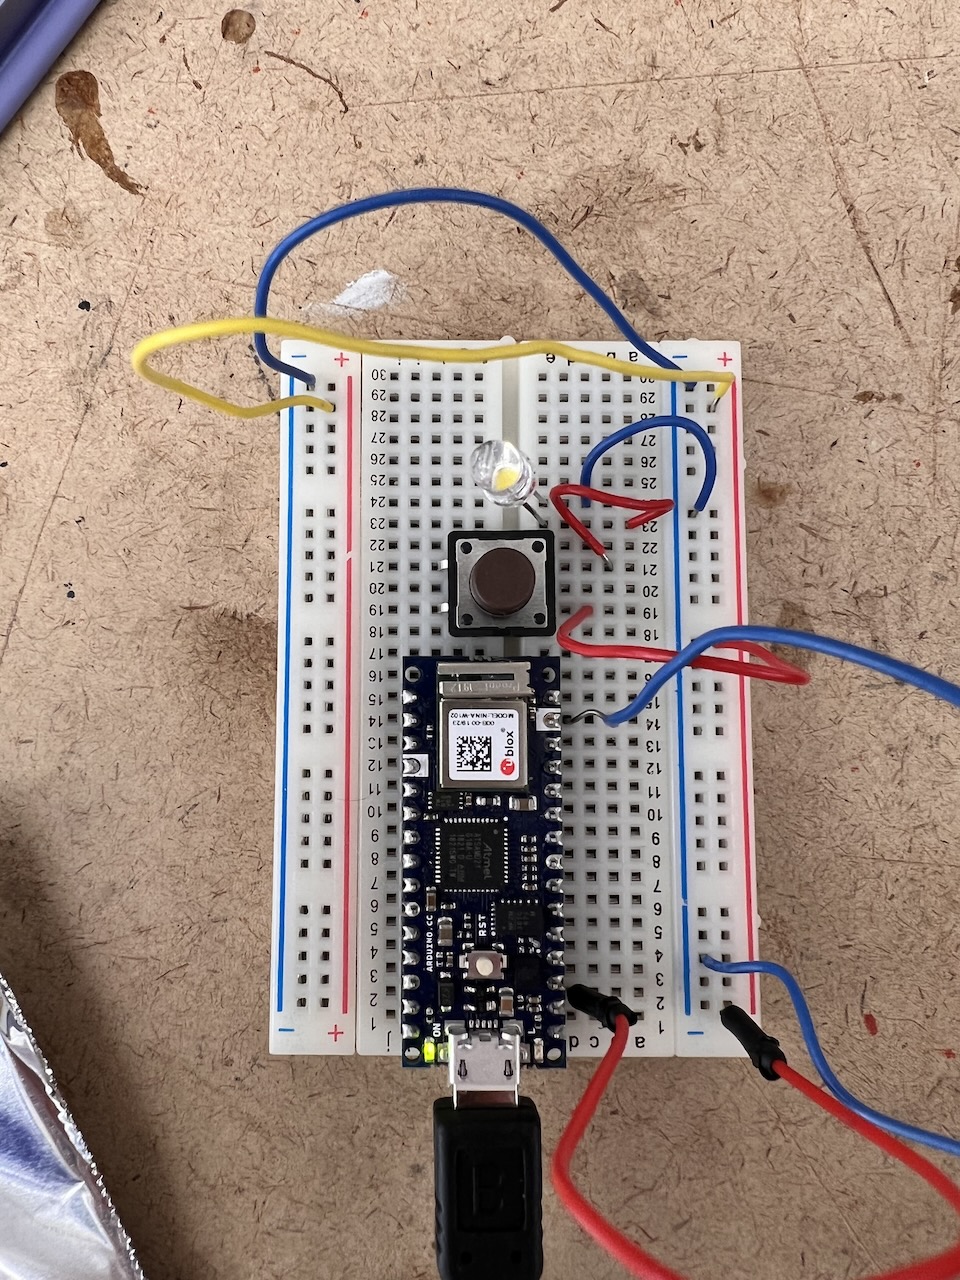 Breadboard with LED lit up